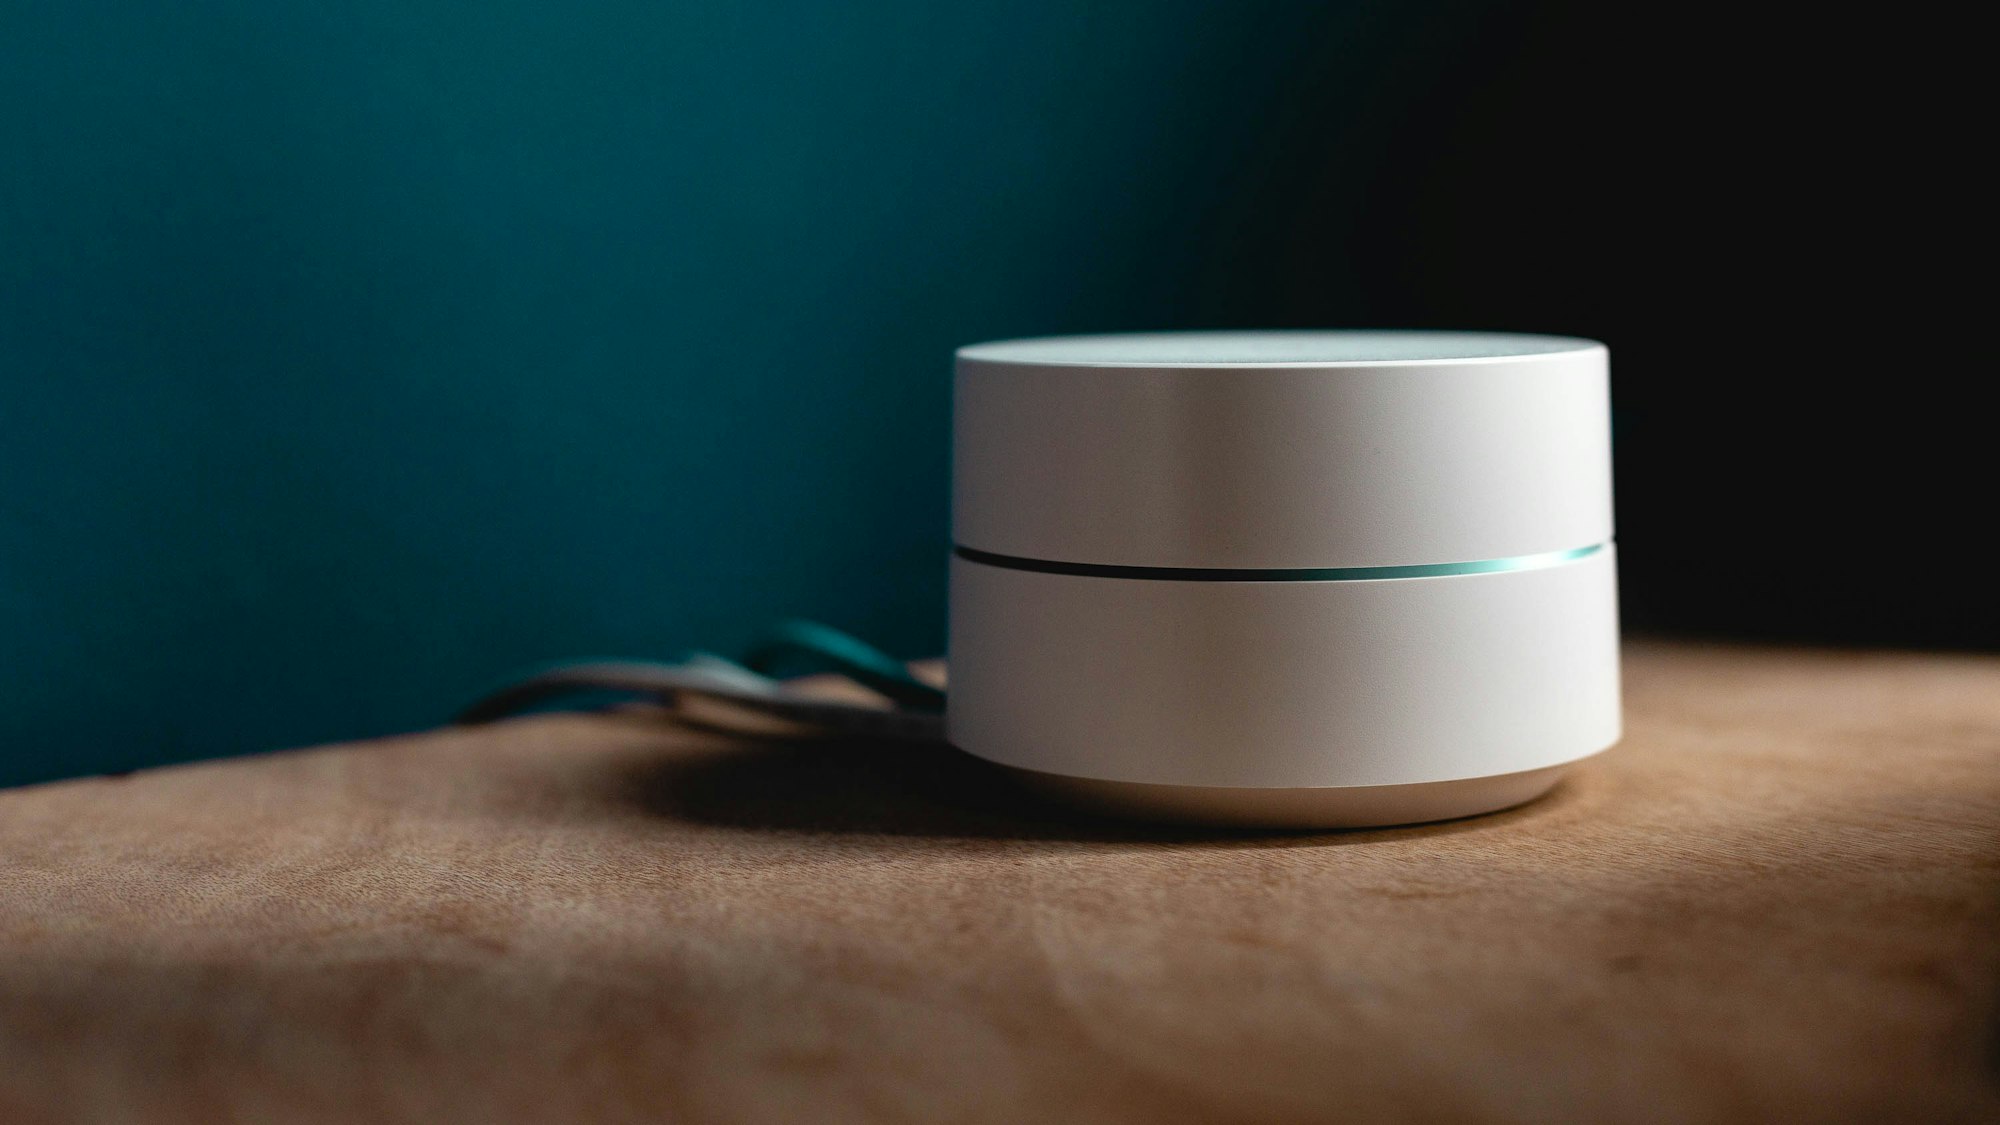 How to Factory Reset Google WiFi